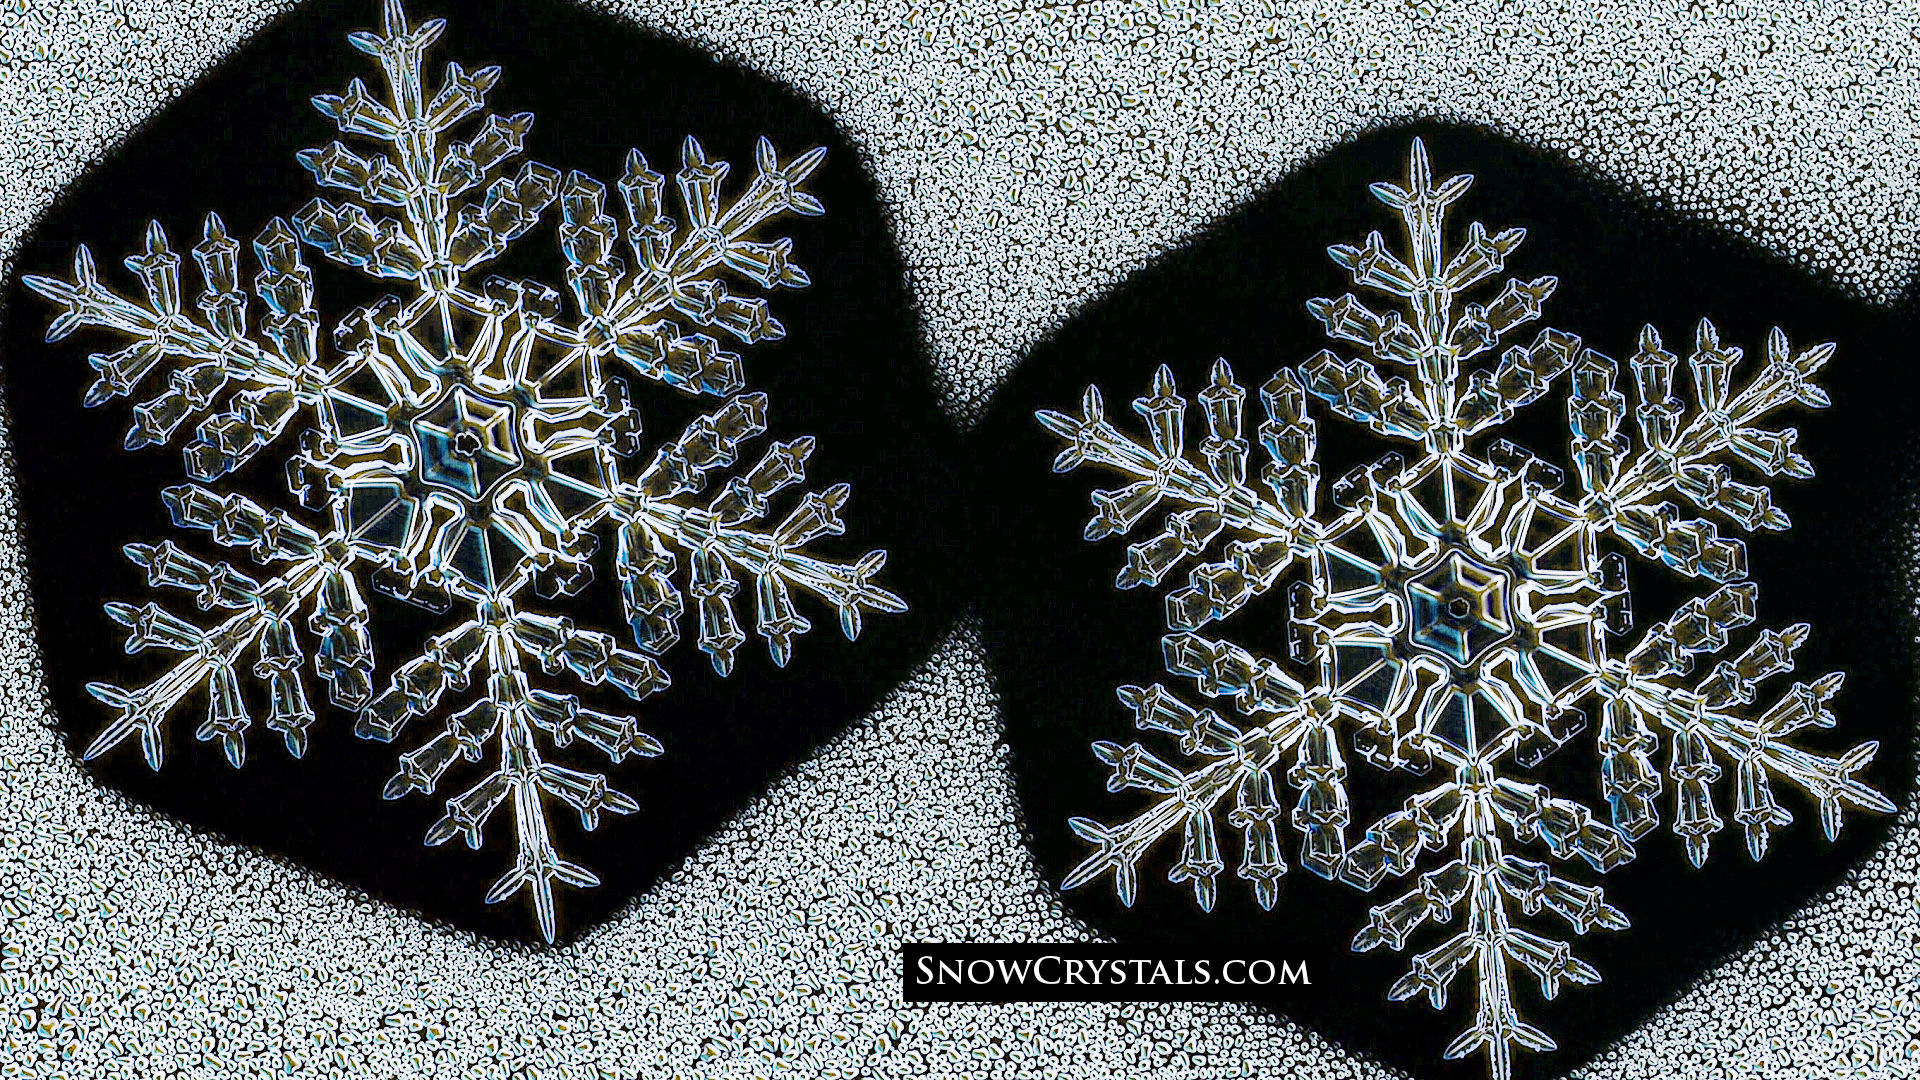 Identical-Twin Snowflakes - SnowCrystals.com